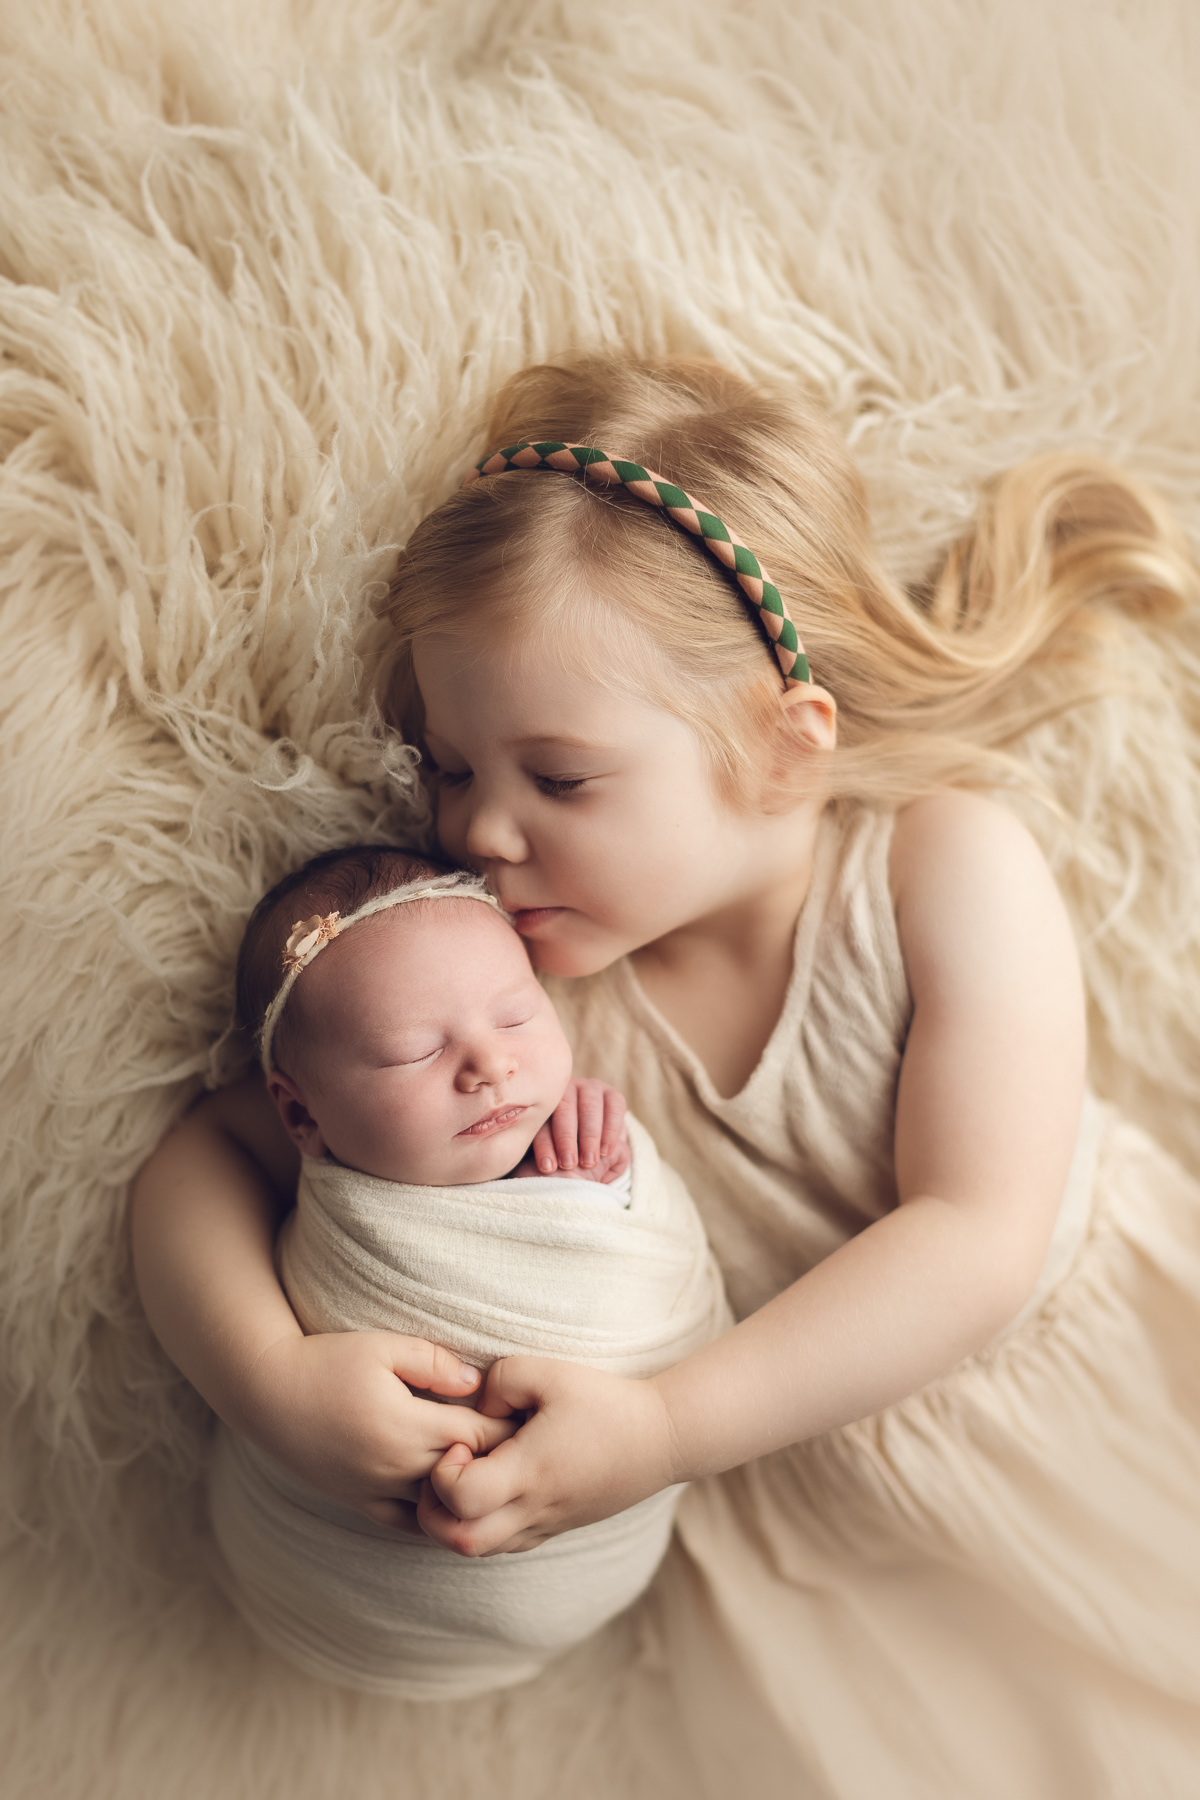 sibling and newborn photography in white color fur. best newborn photographer in surrey